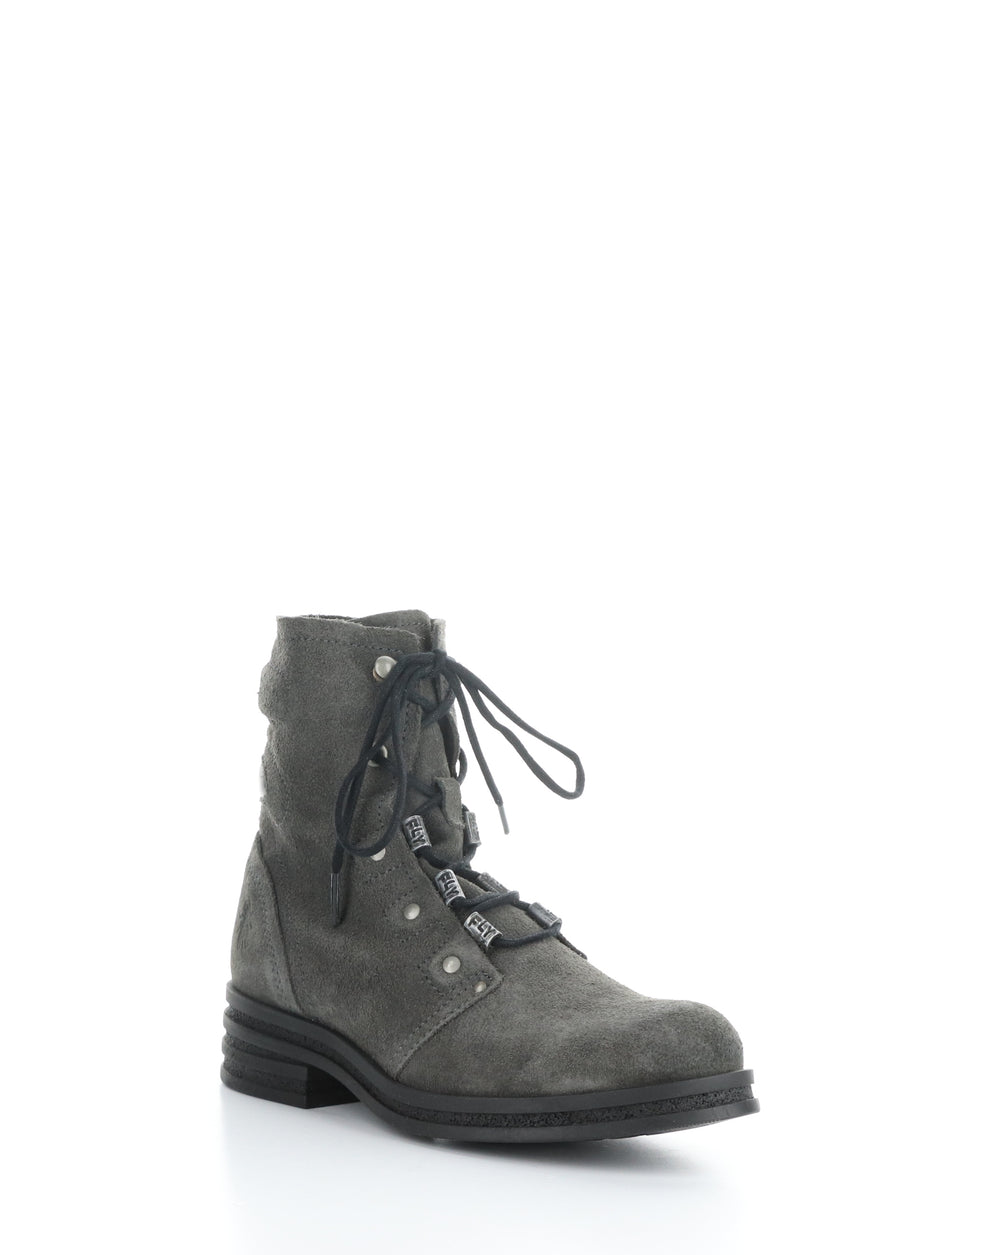 KNOT792FLY 006 DIESEL Lace-up Boots